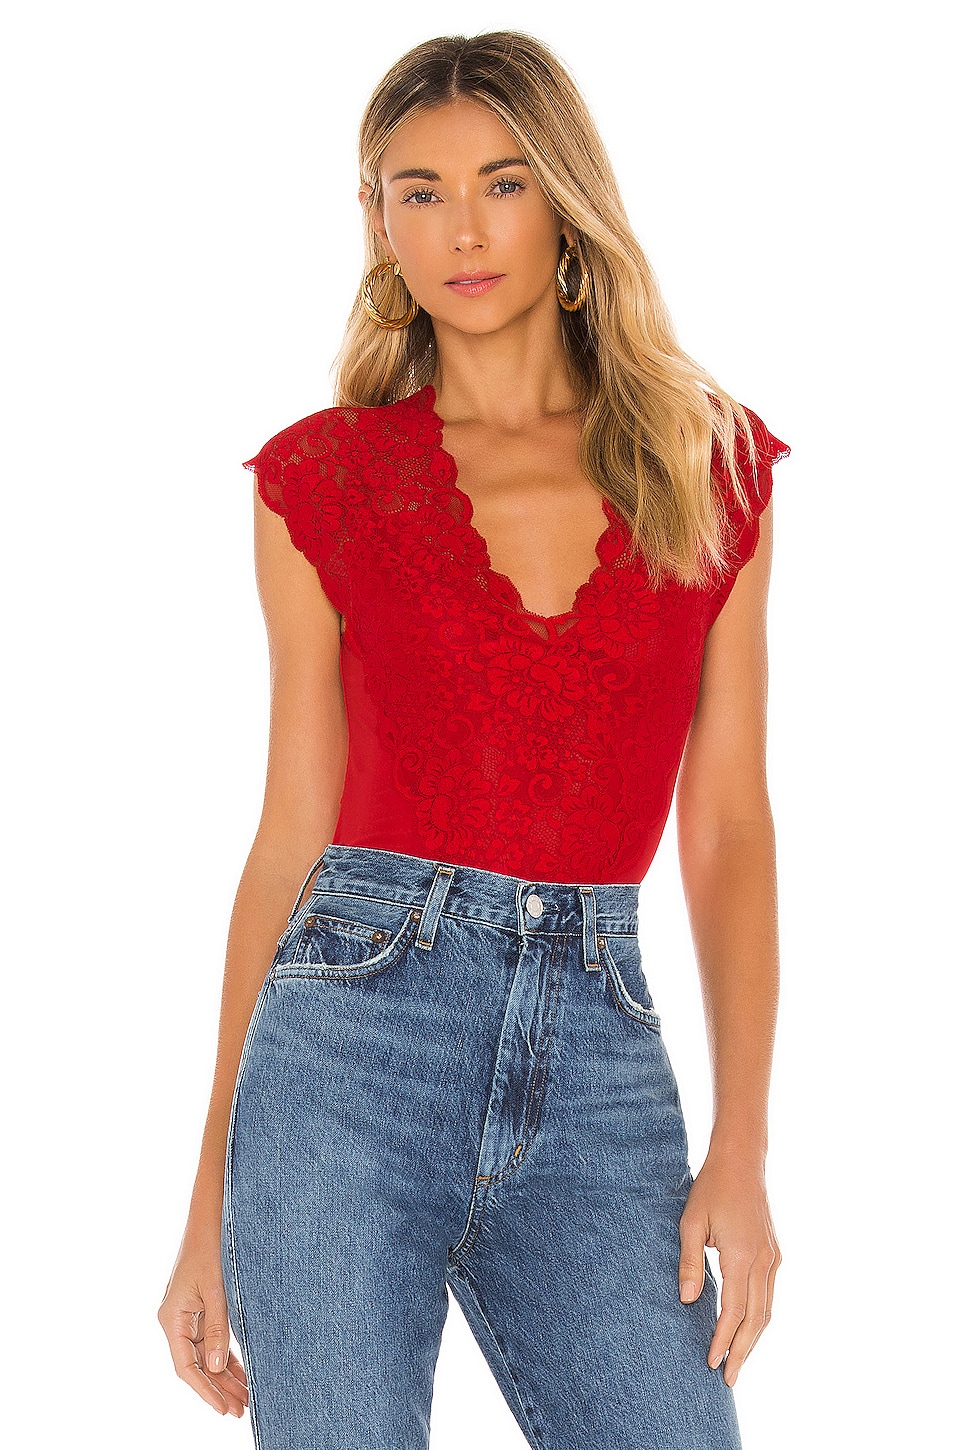 HAH Lady Like Bodysuit in Rouge Red | REVOLVE